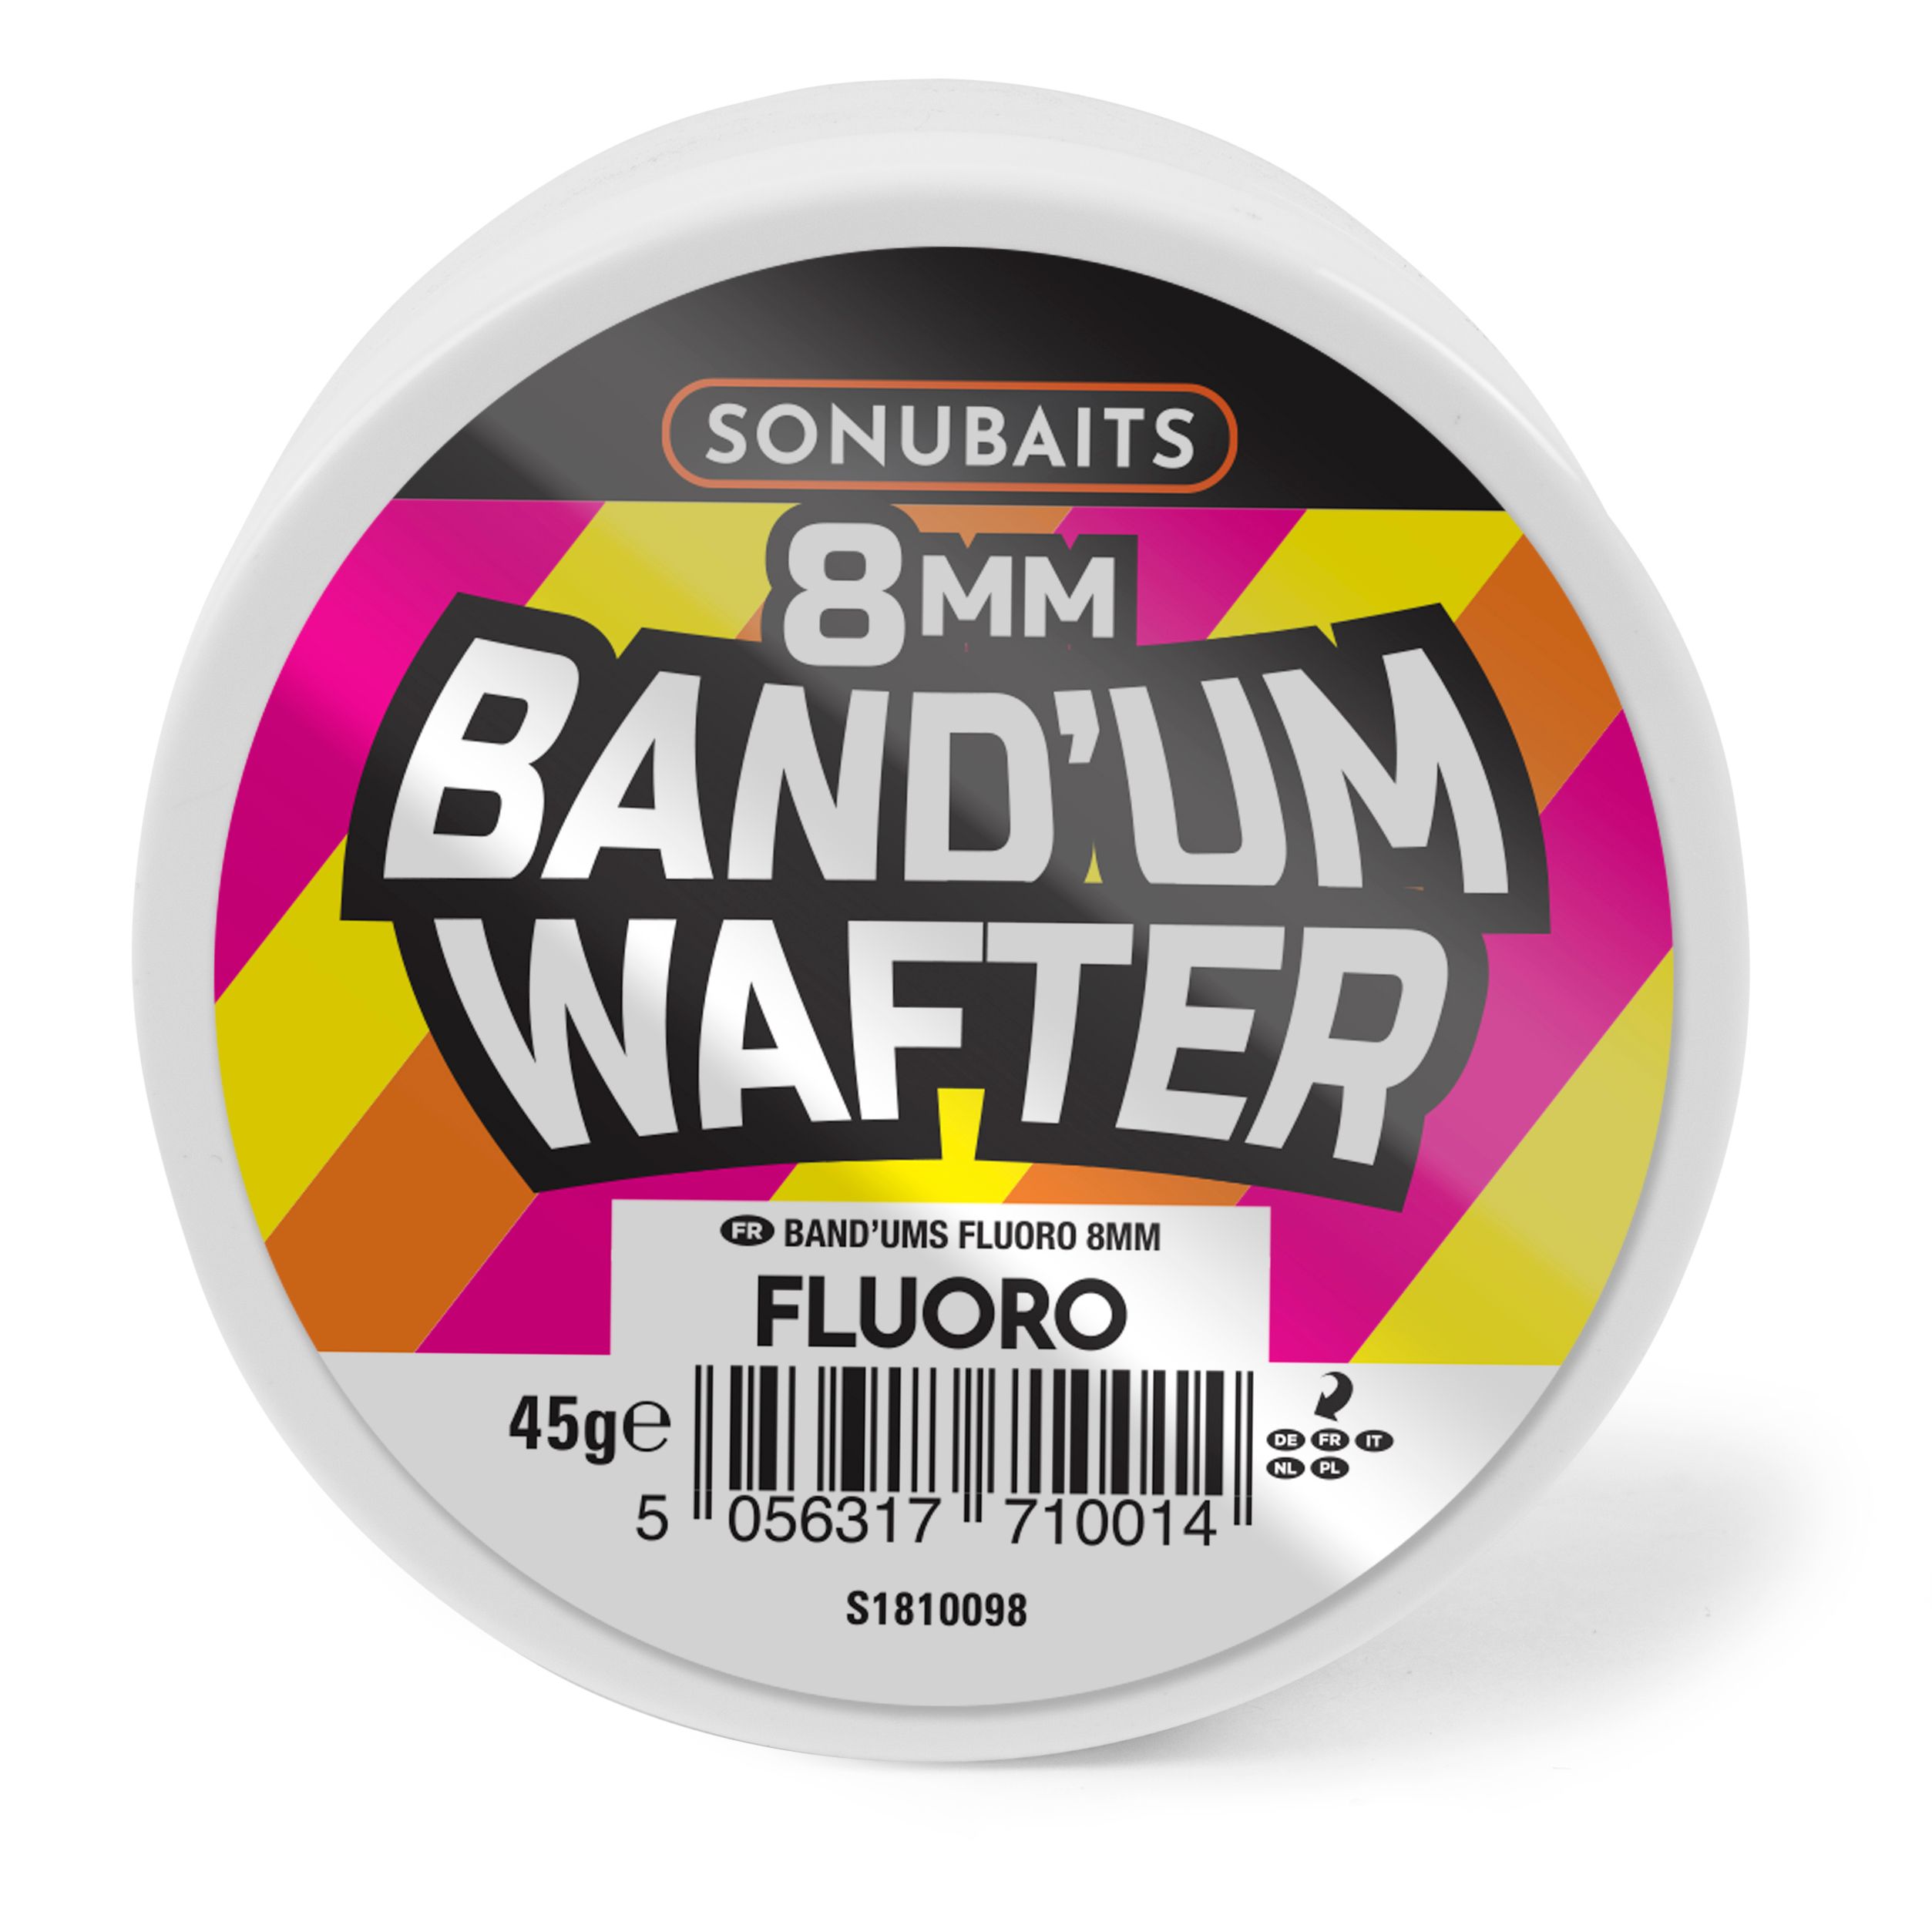 Sonubaits Band'um Wafters 8mm - Fluoro